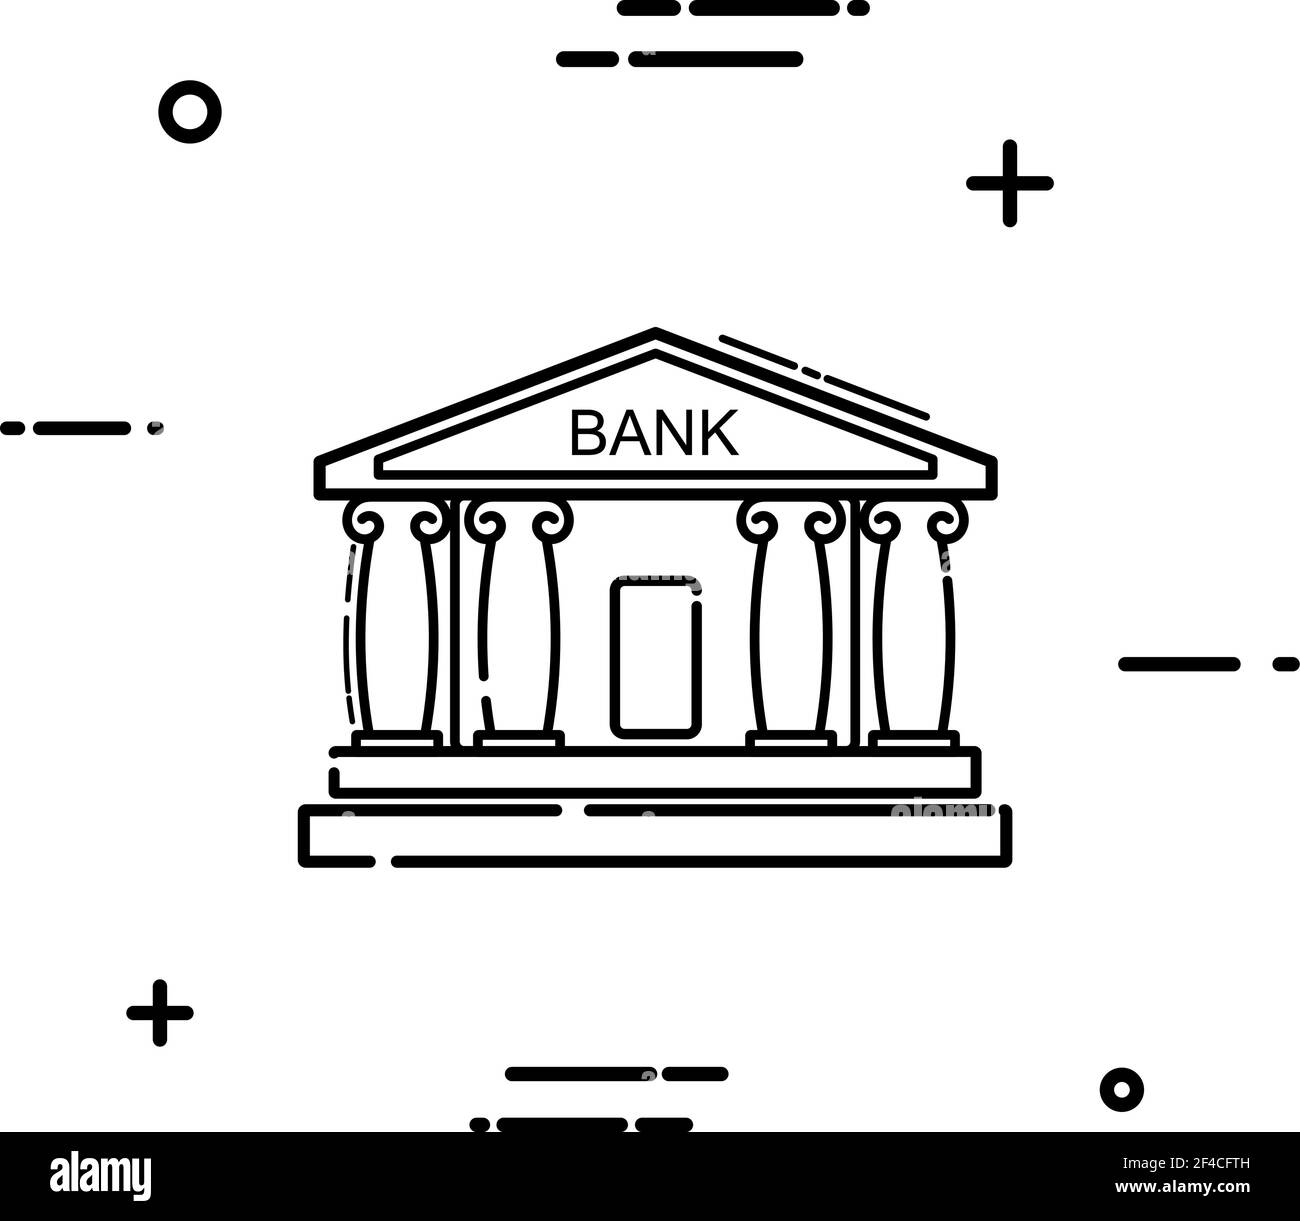 Linear bank icon on a white background. Simple line drawing of a bank  building with columns. Vector illustration Stock Vector Image & Art - Alamy